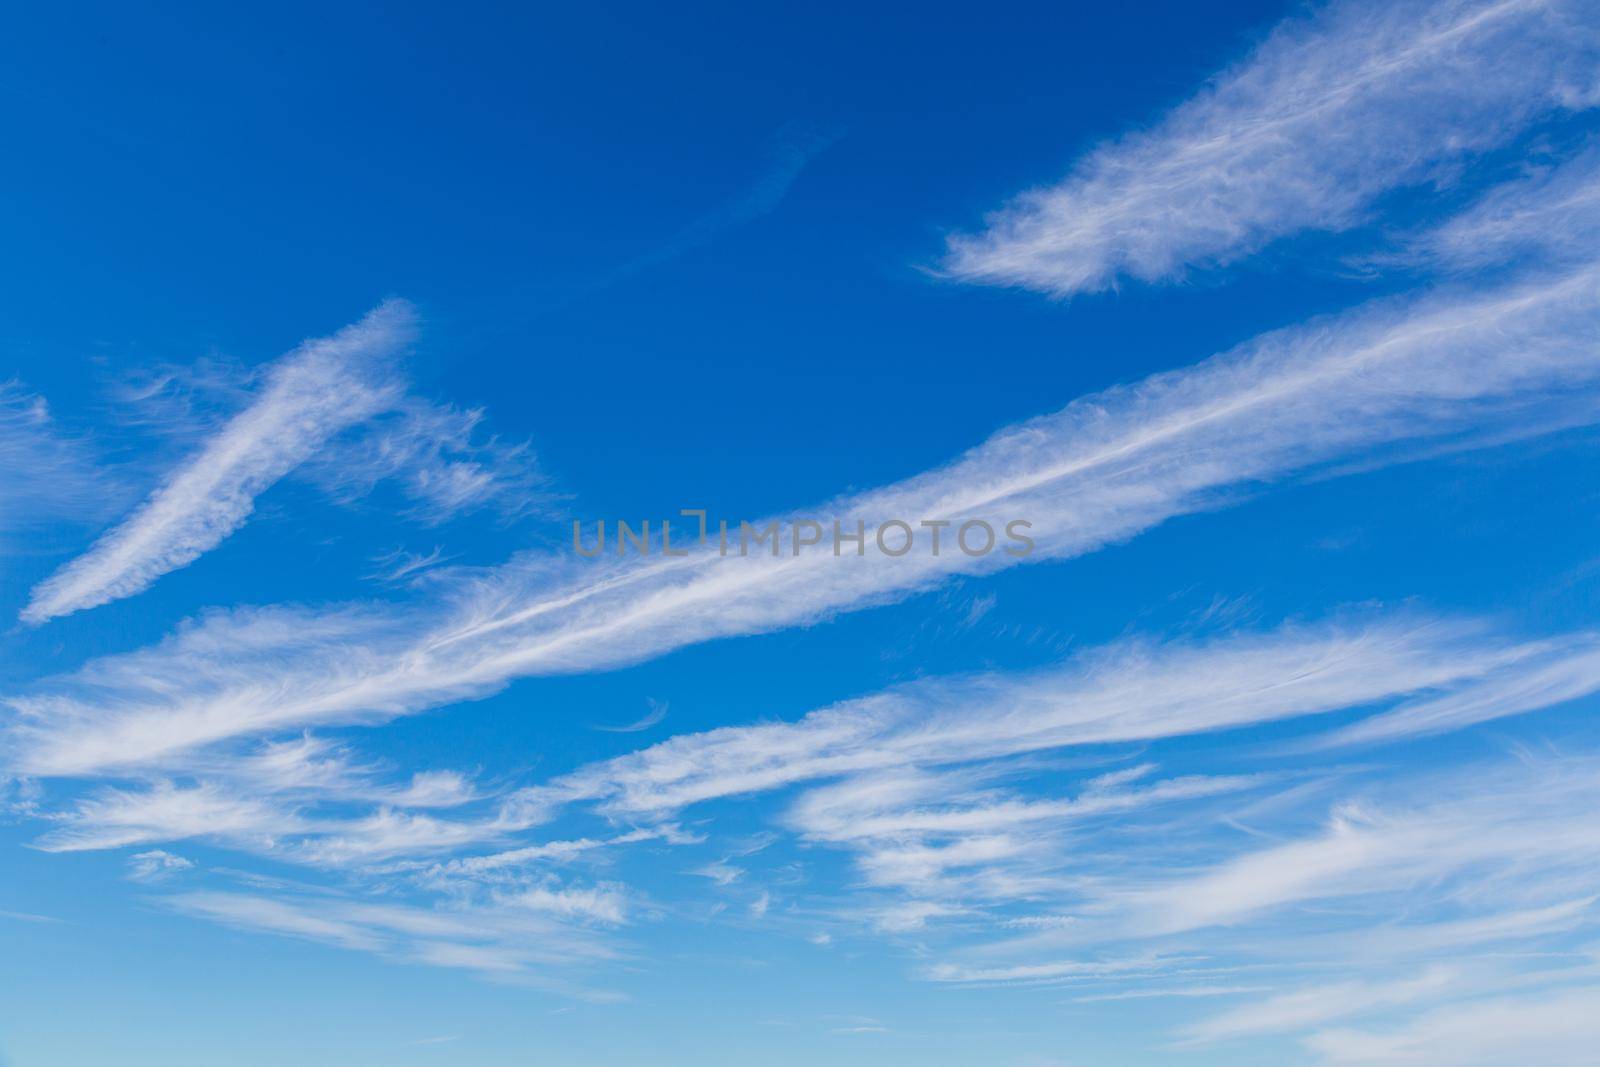 White clouds and stripes in the blue sky